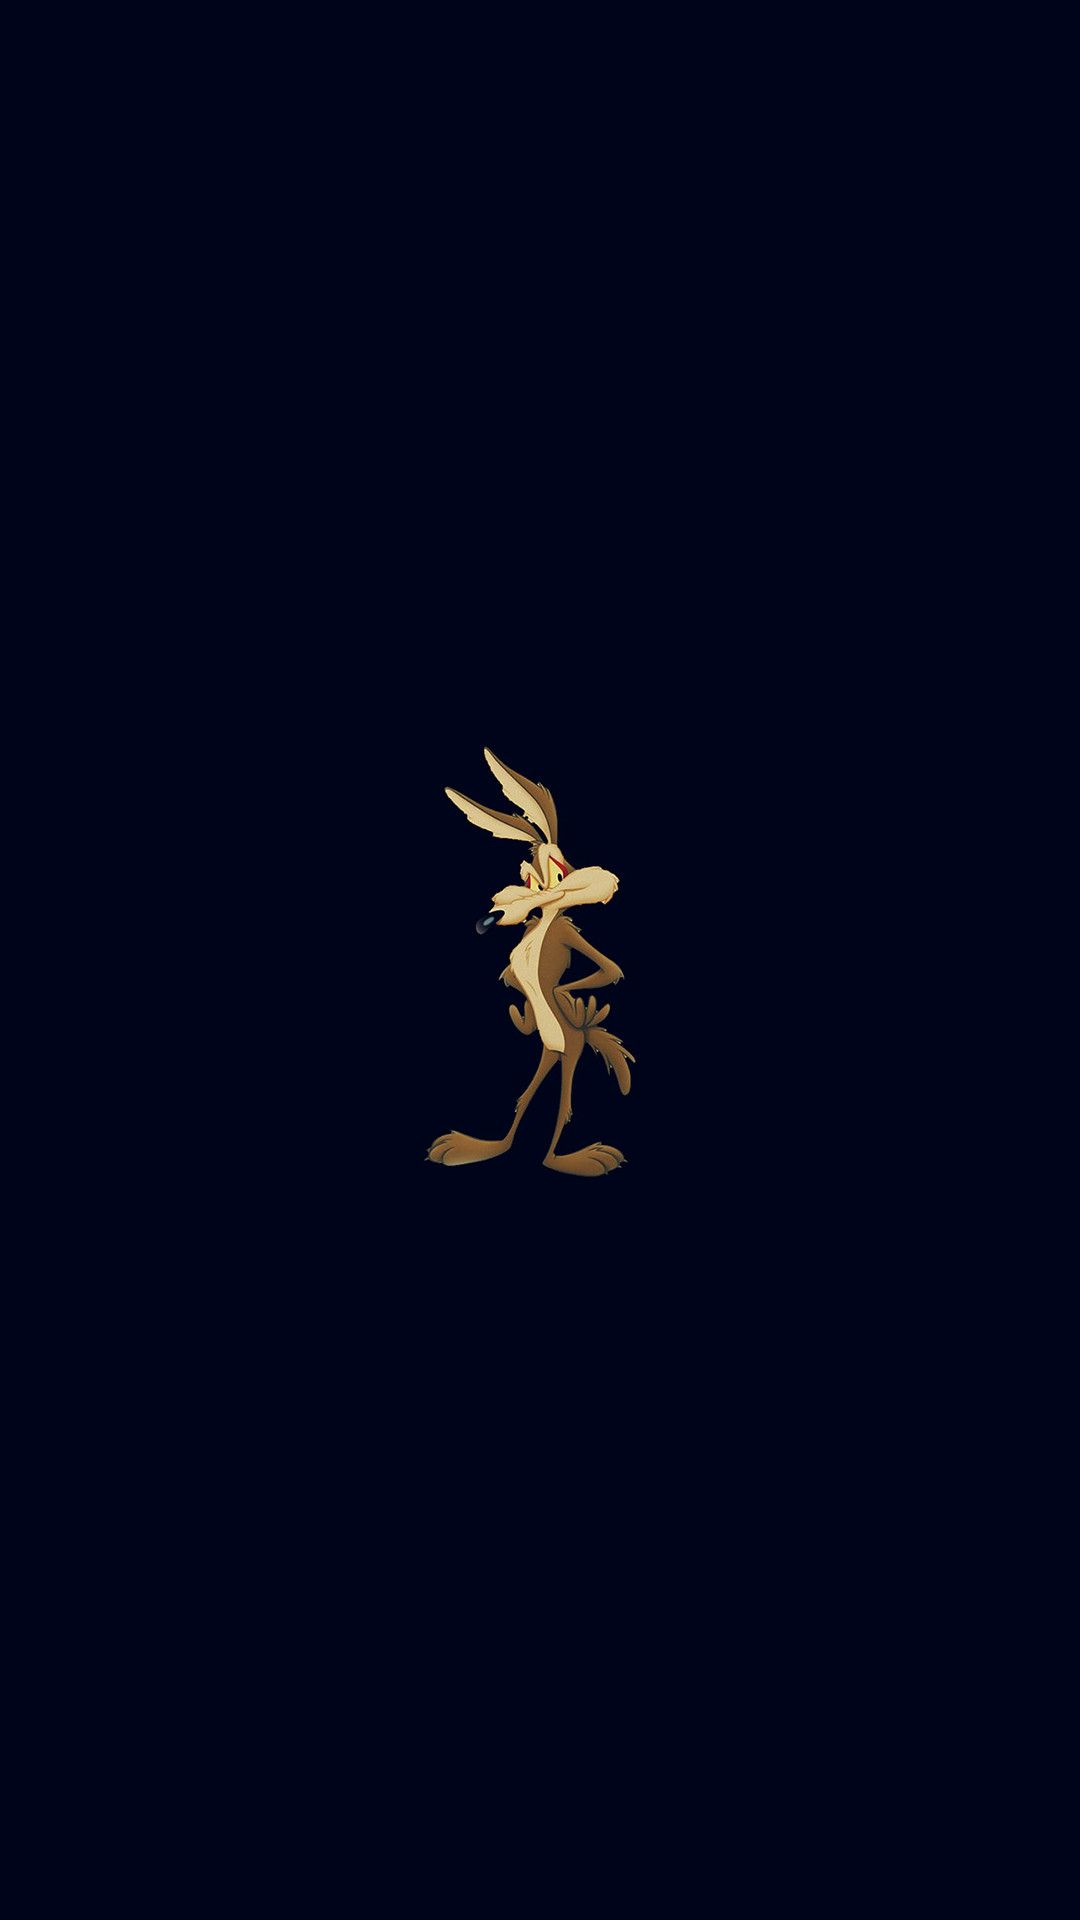 The image of a golden rabbit on black background - Bugs Bunny